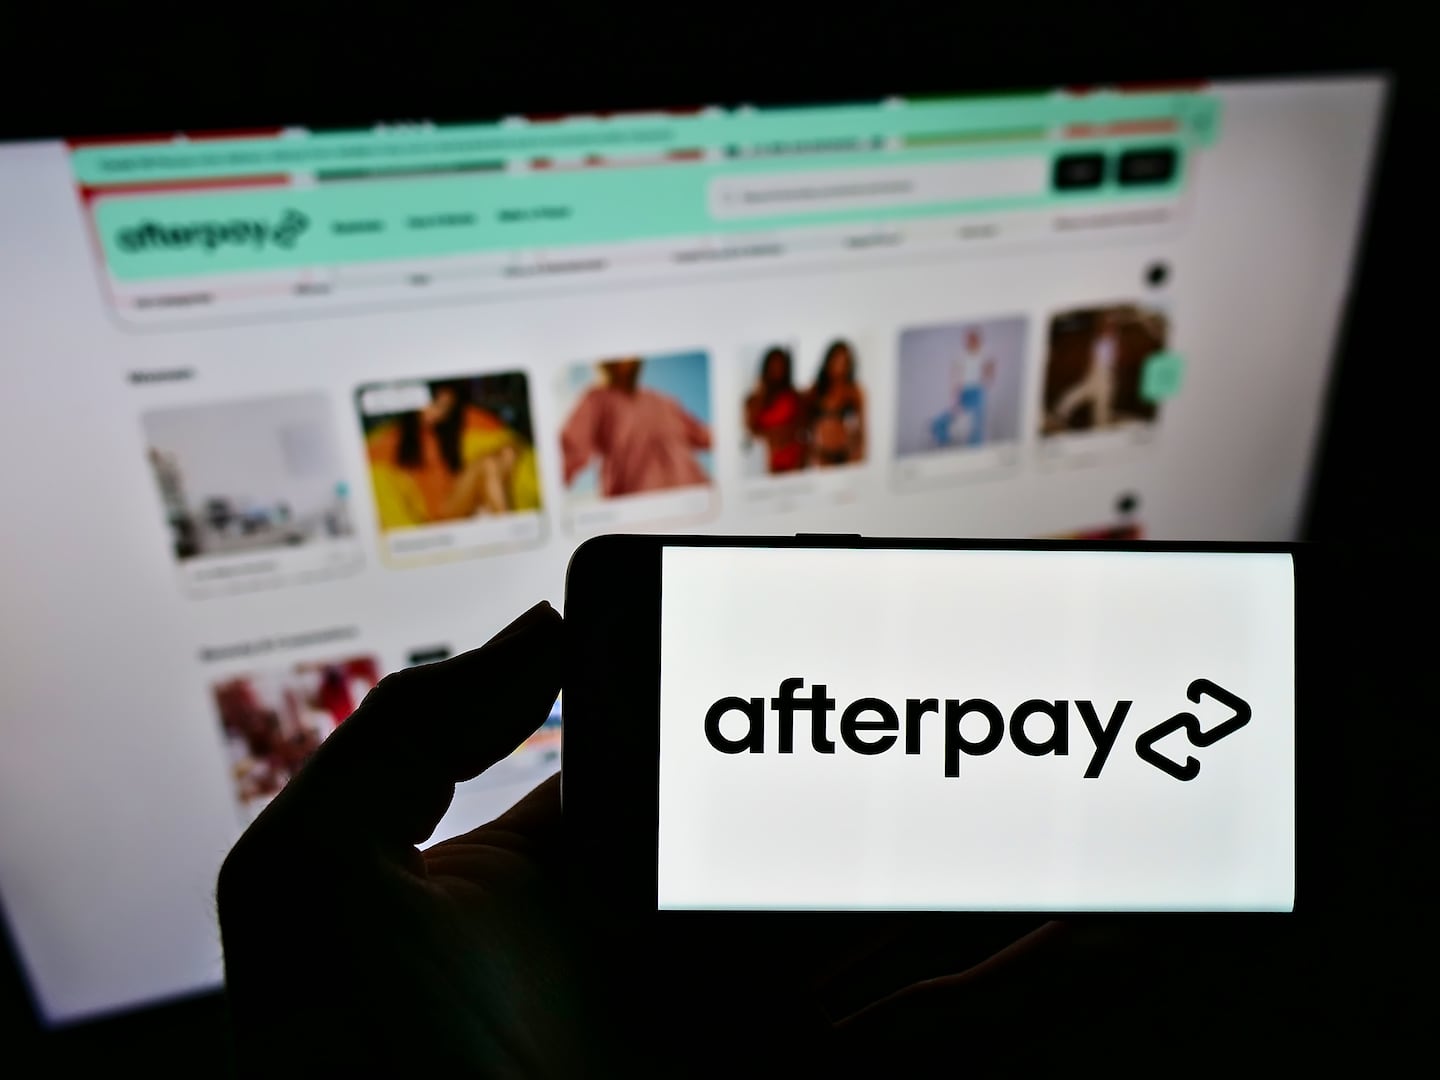 Square is buying Afterpay in deal worth $29 billion. Shutterstock.